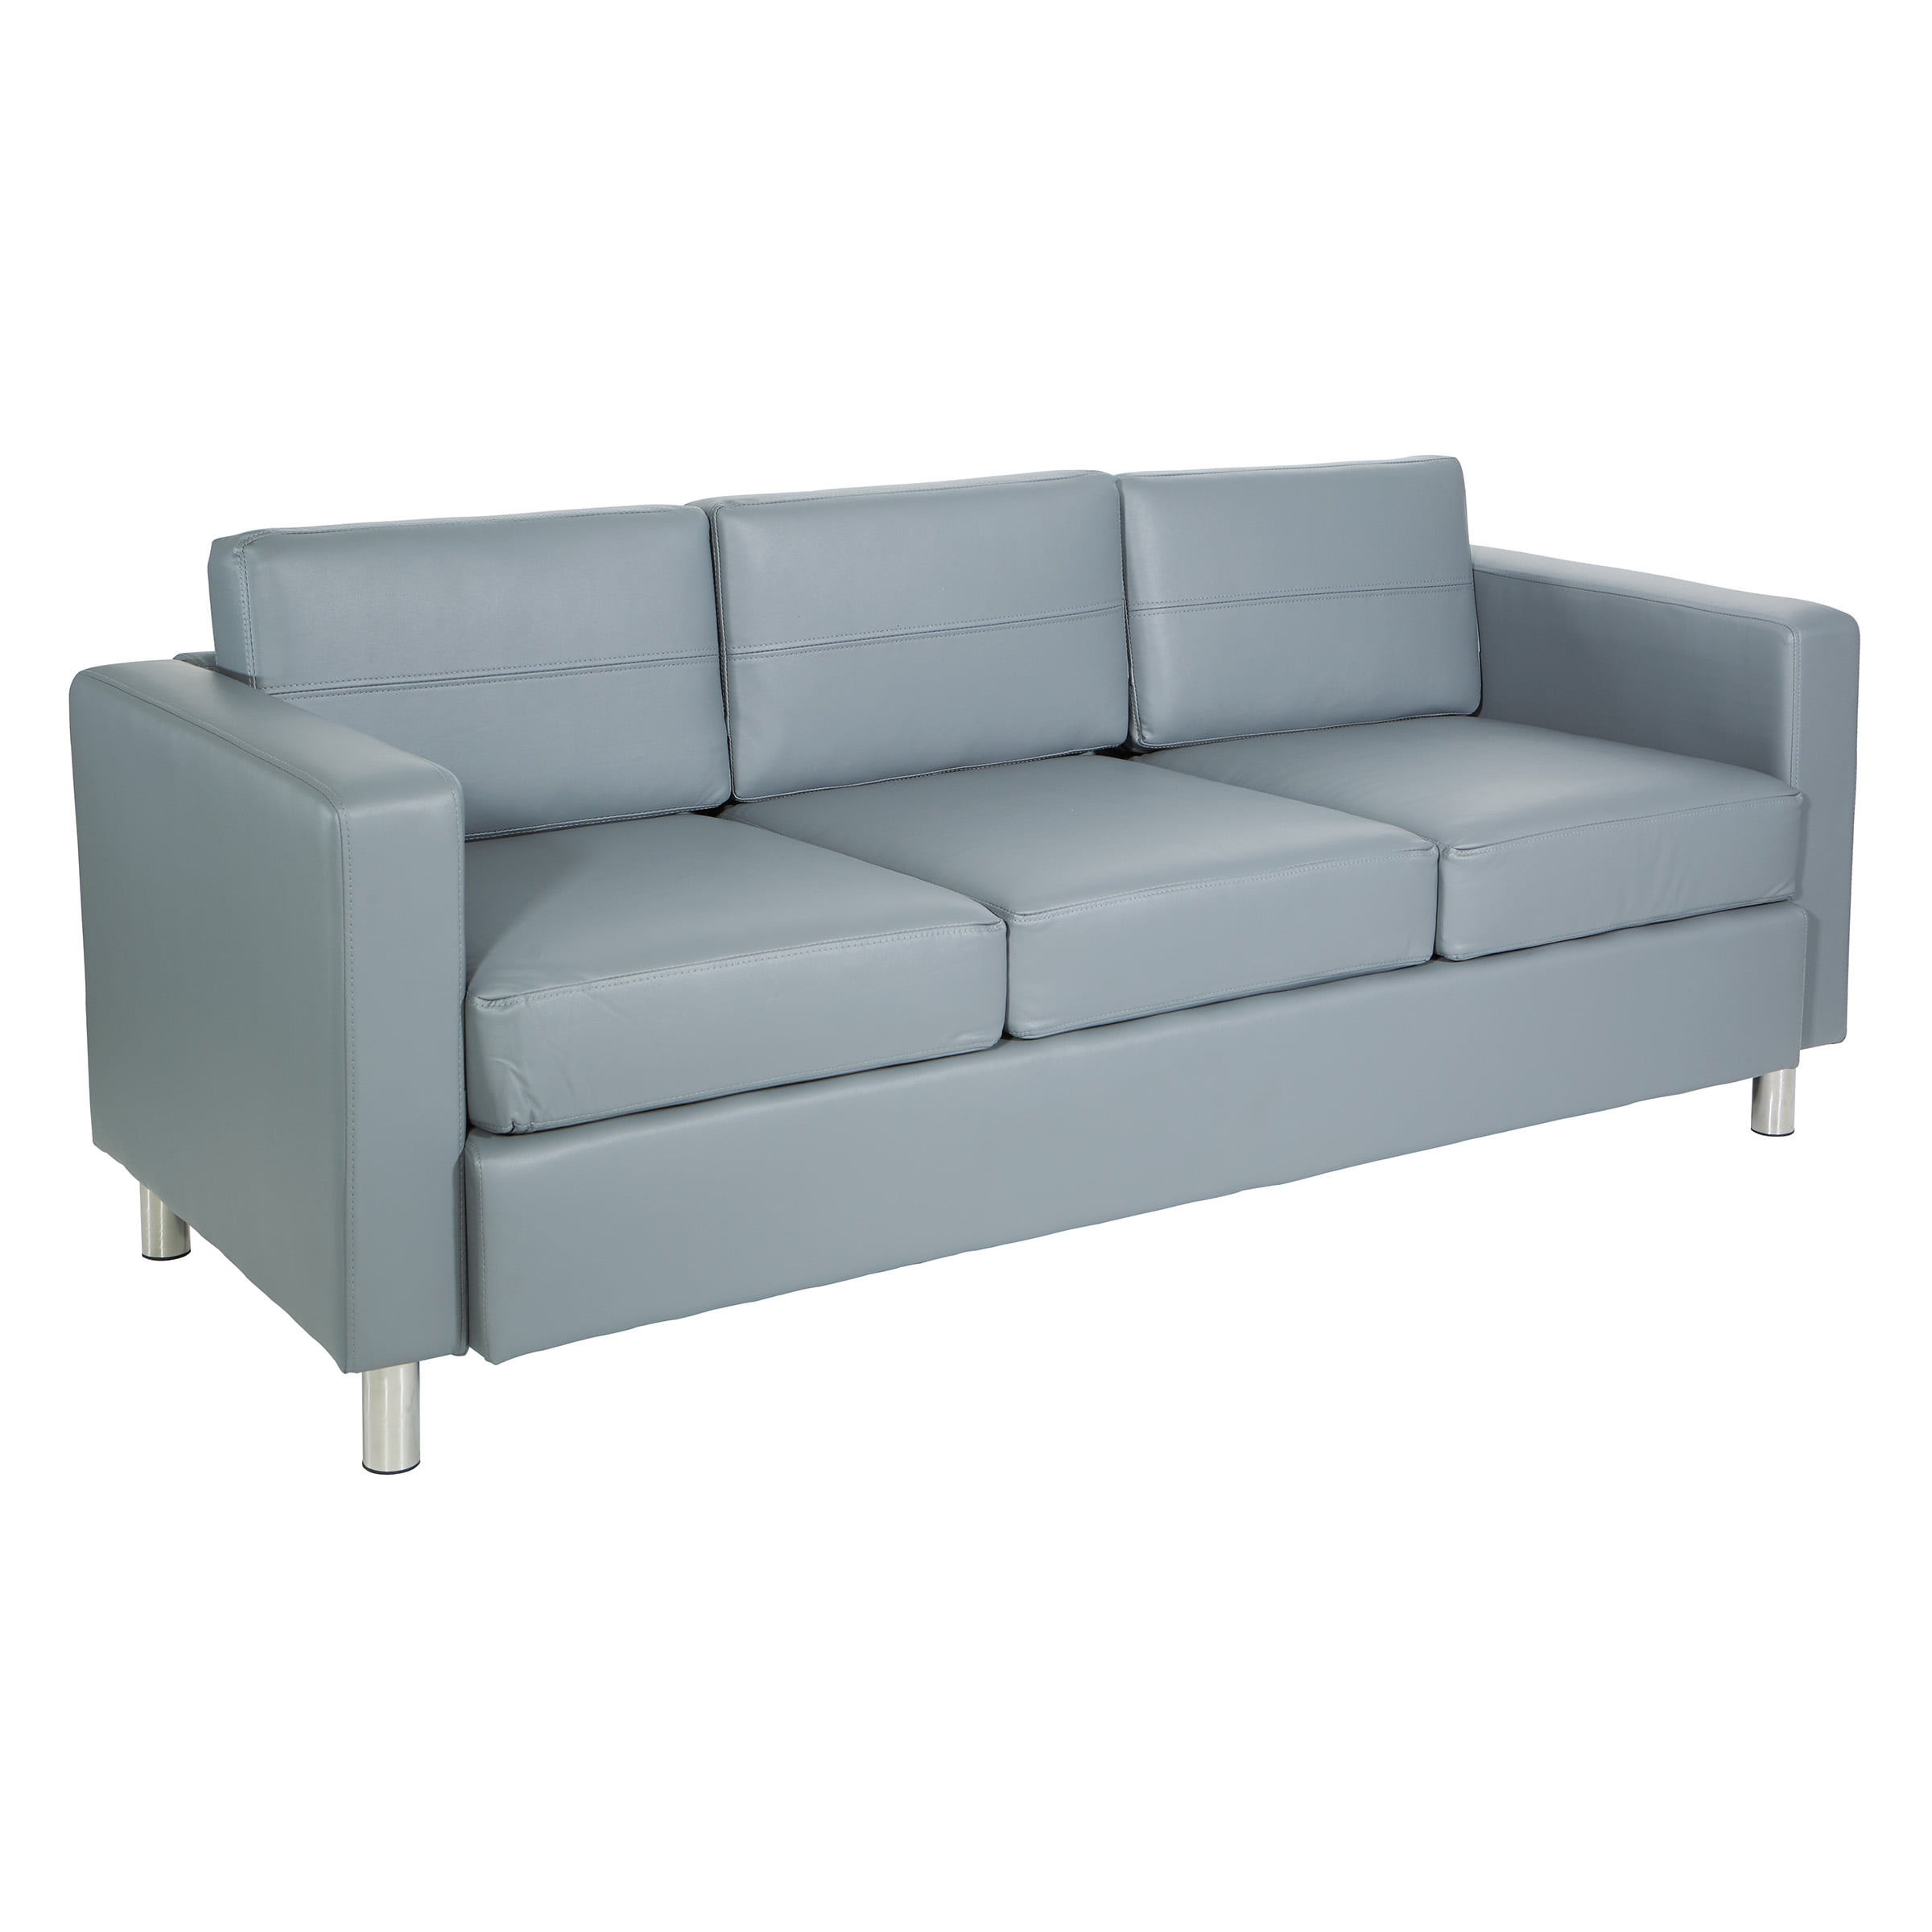 Couch Sofa OSP Grey Silver in and with Leather Color Spring Furnishings Home Pacific Legs Faux Charcoal Seats Box